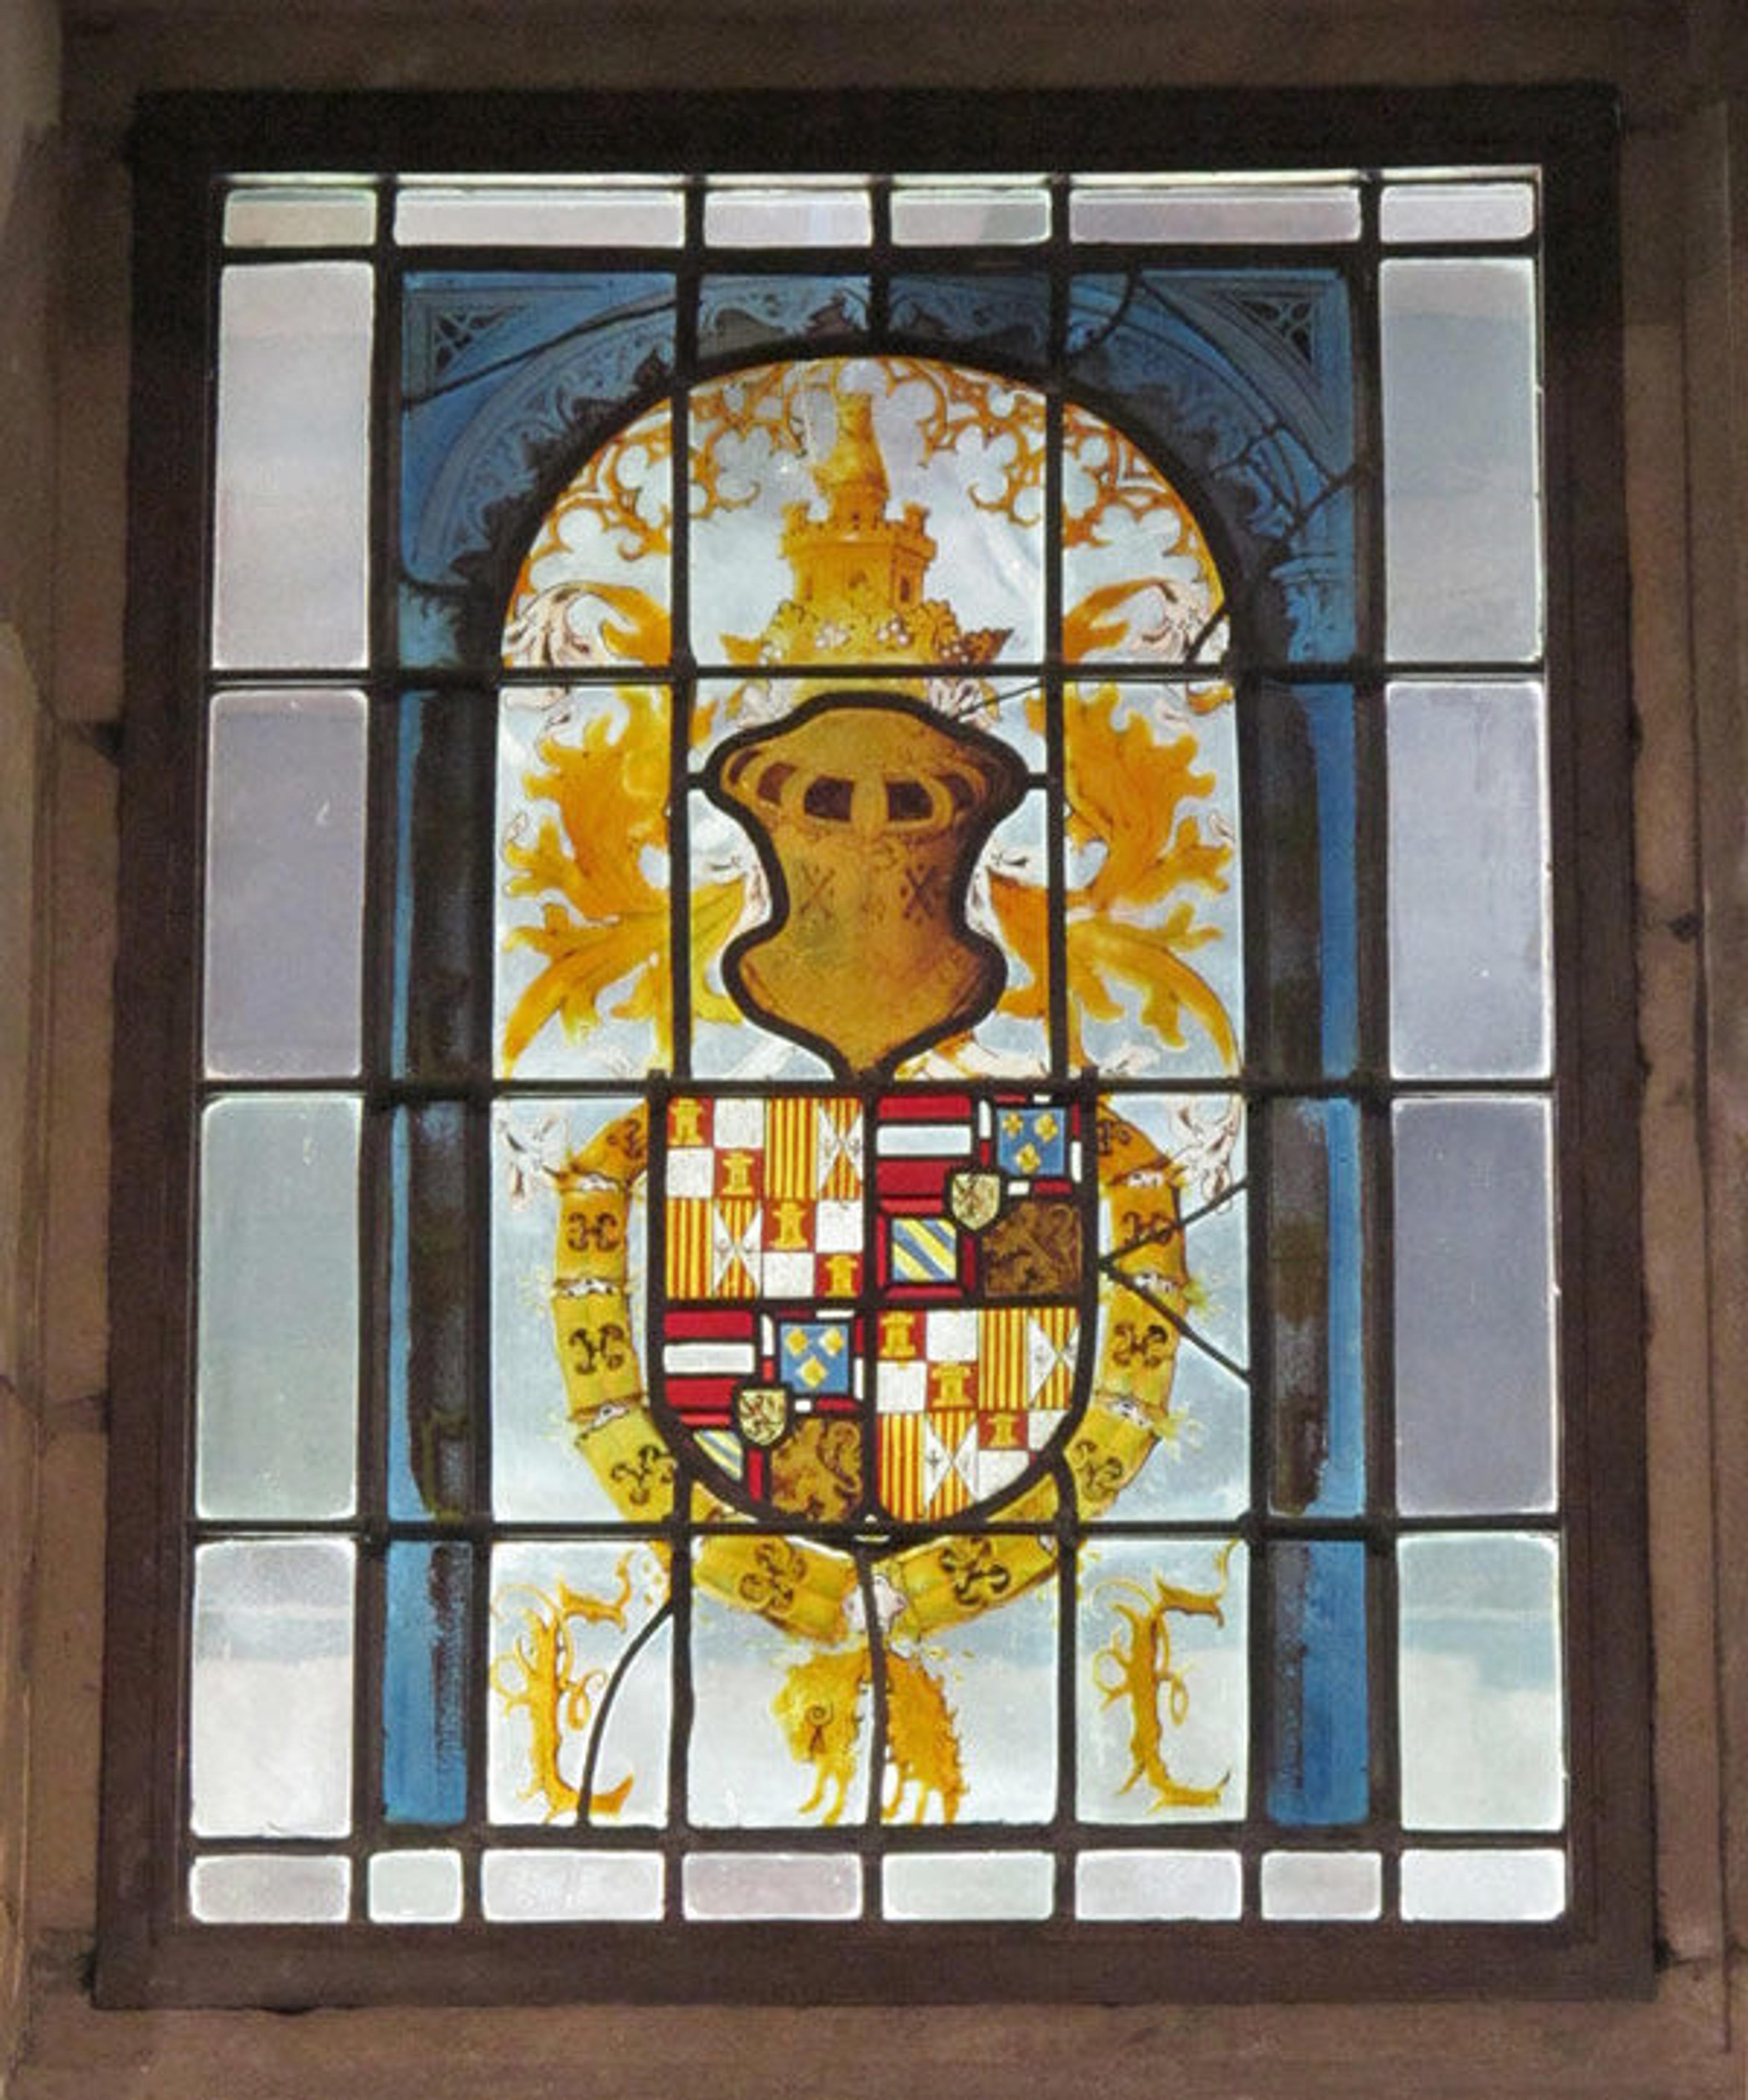 Heraldic Panel with Arms of the House of Hapsburg. The sinister chief (upper left corner) contains a quartering for Spain that depicts the castle of Castille and the lion of Léon